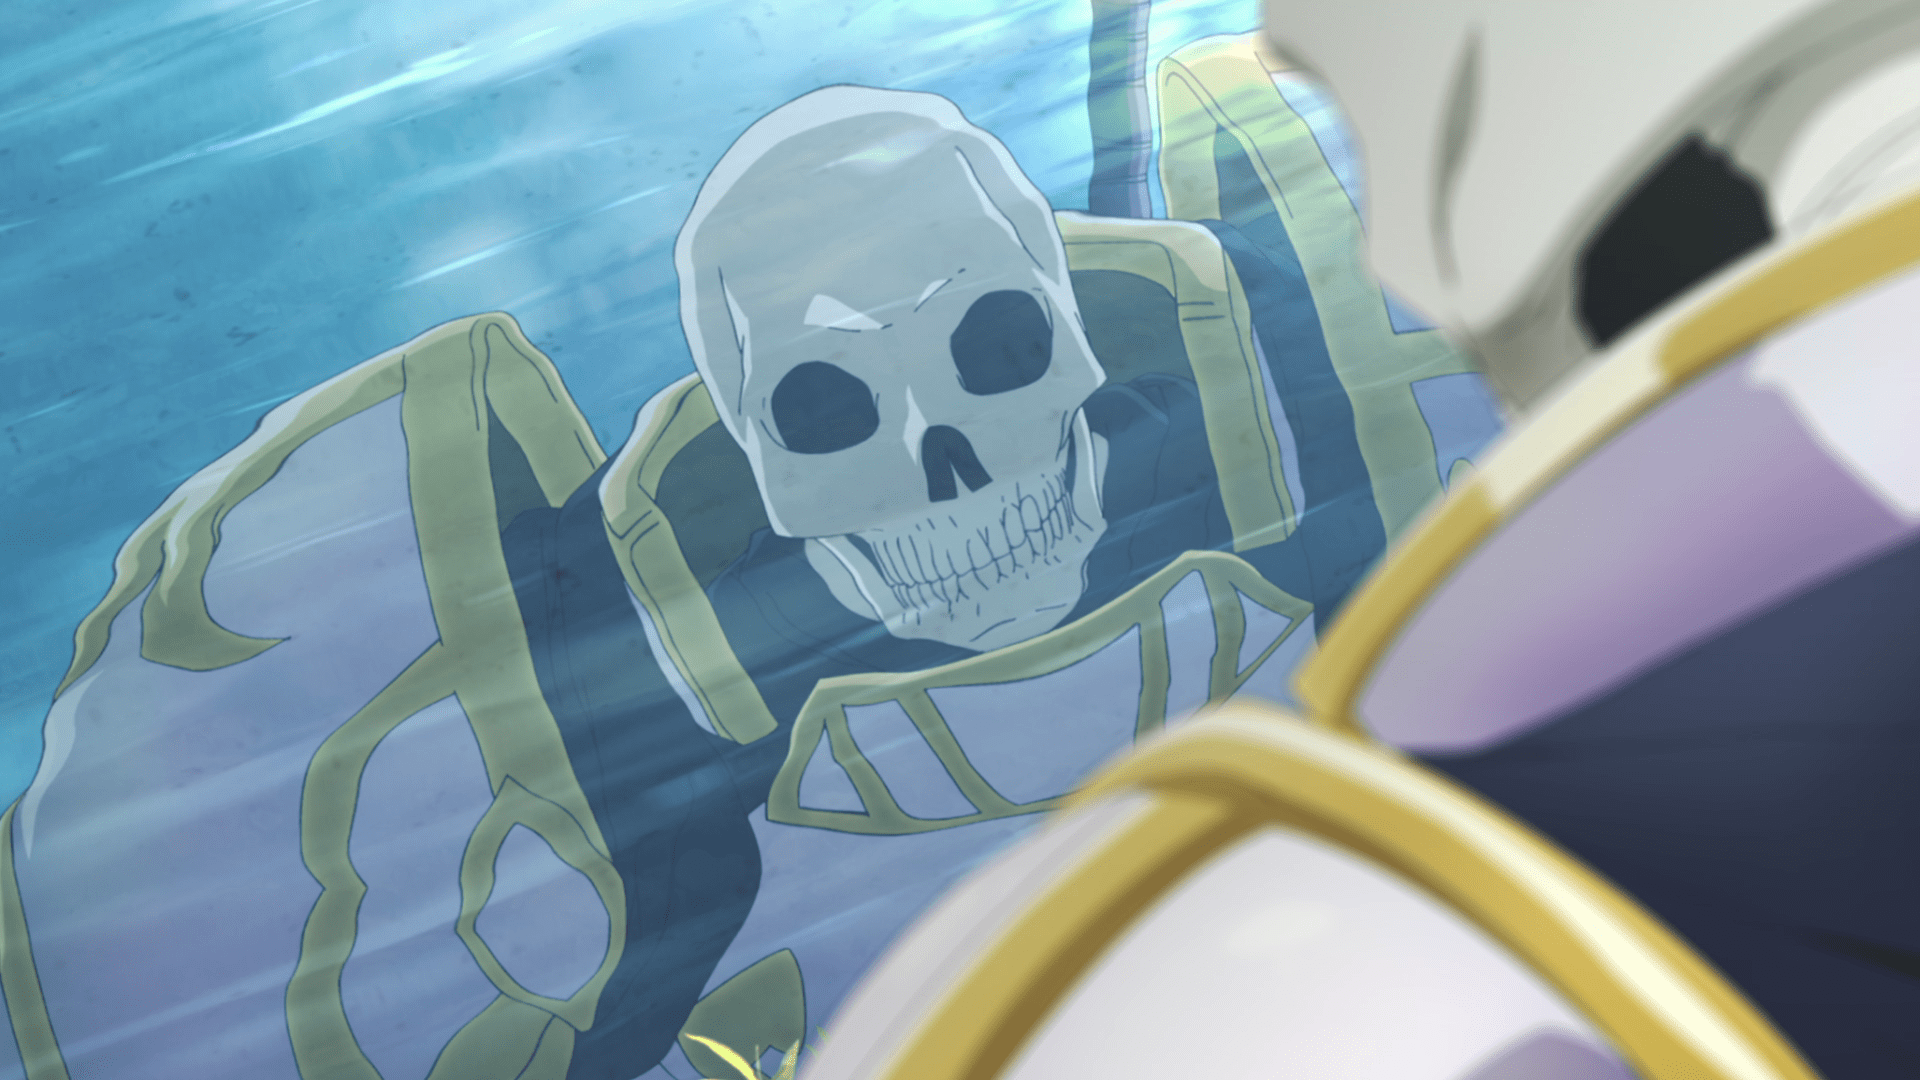 Skeleton Knight in Another World Shares New Anime Key Visual